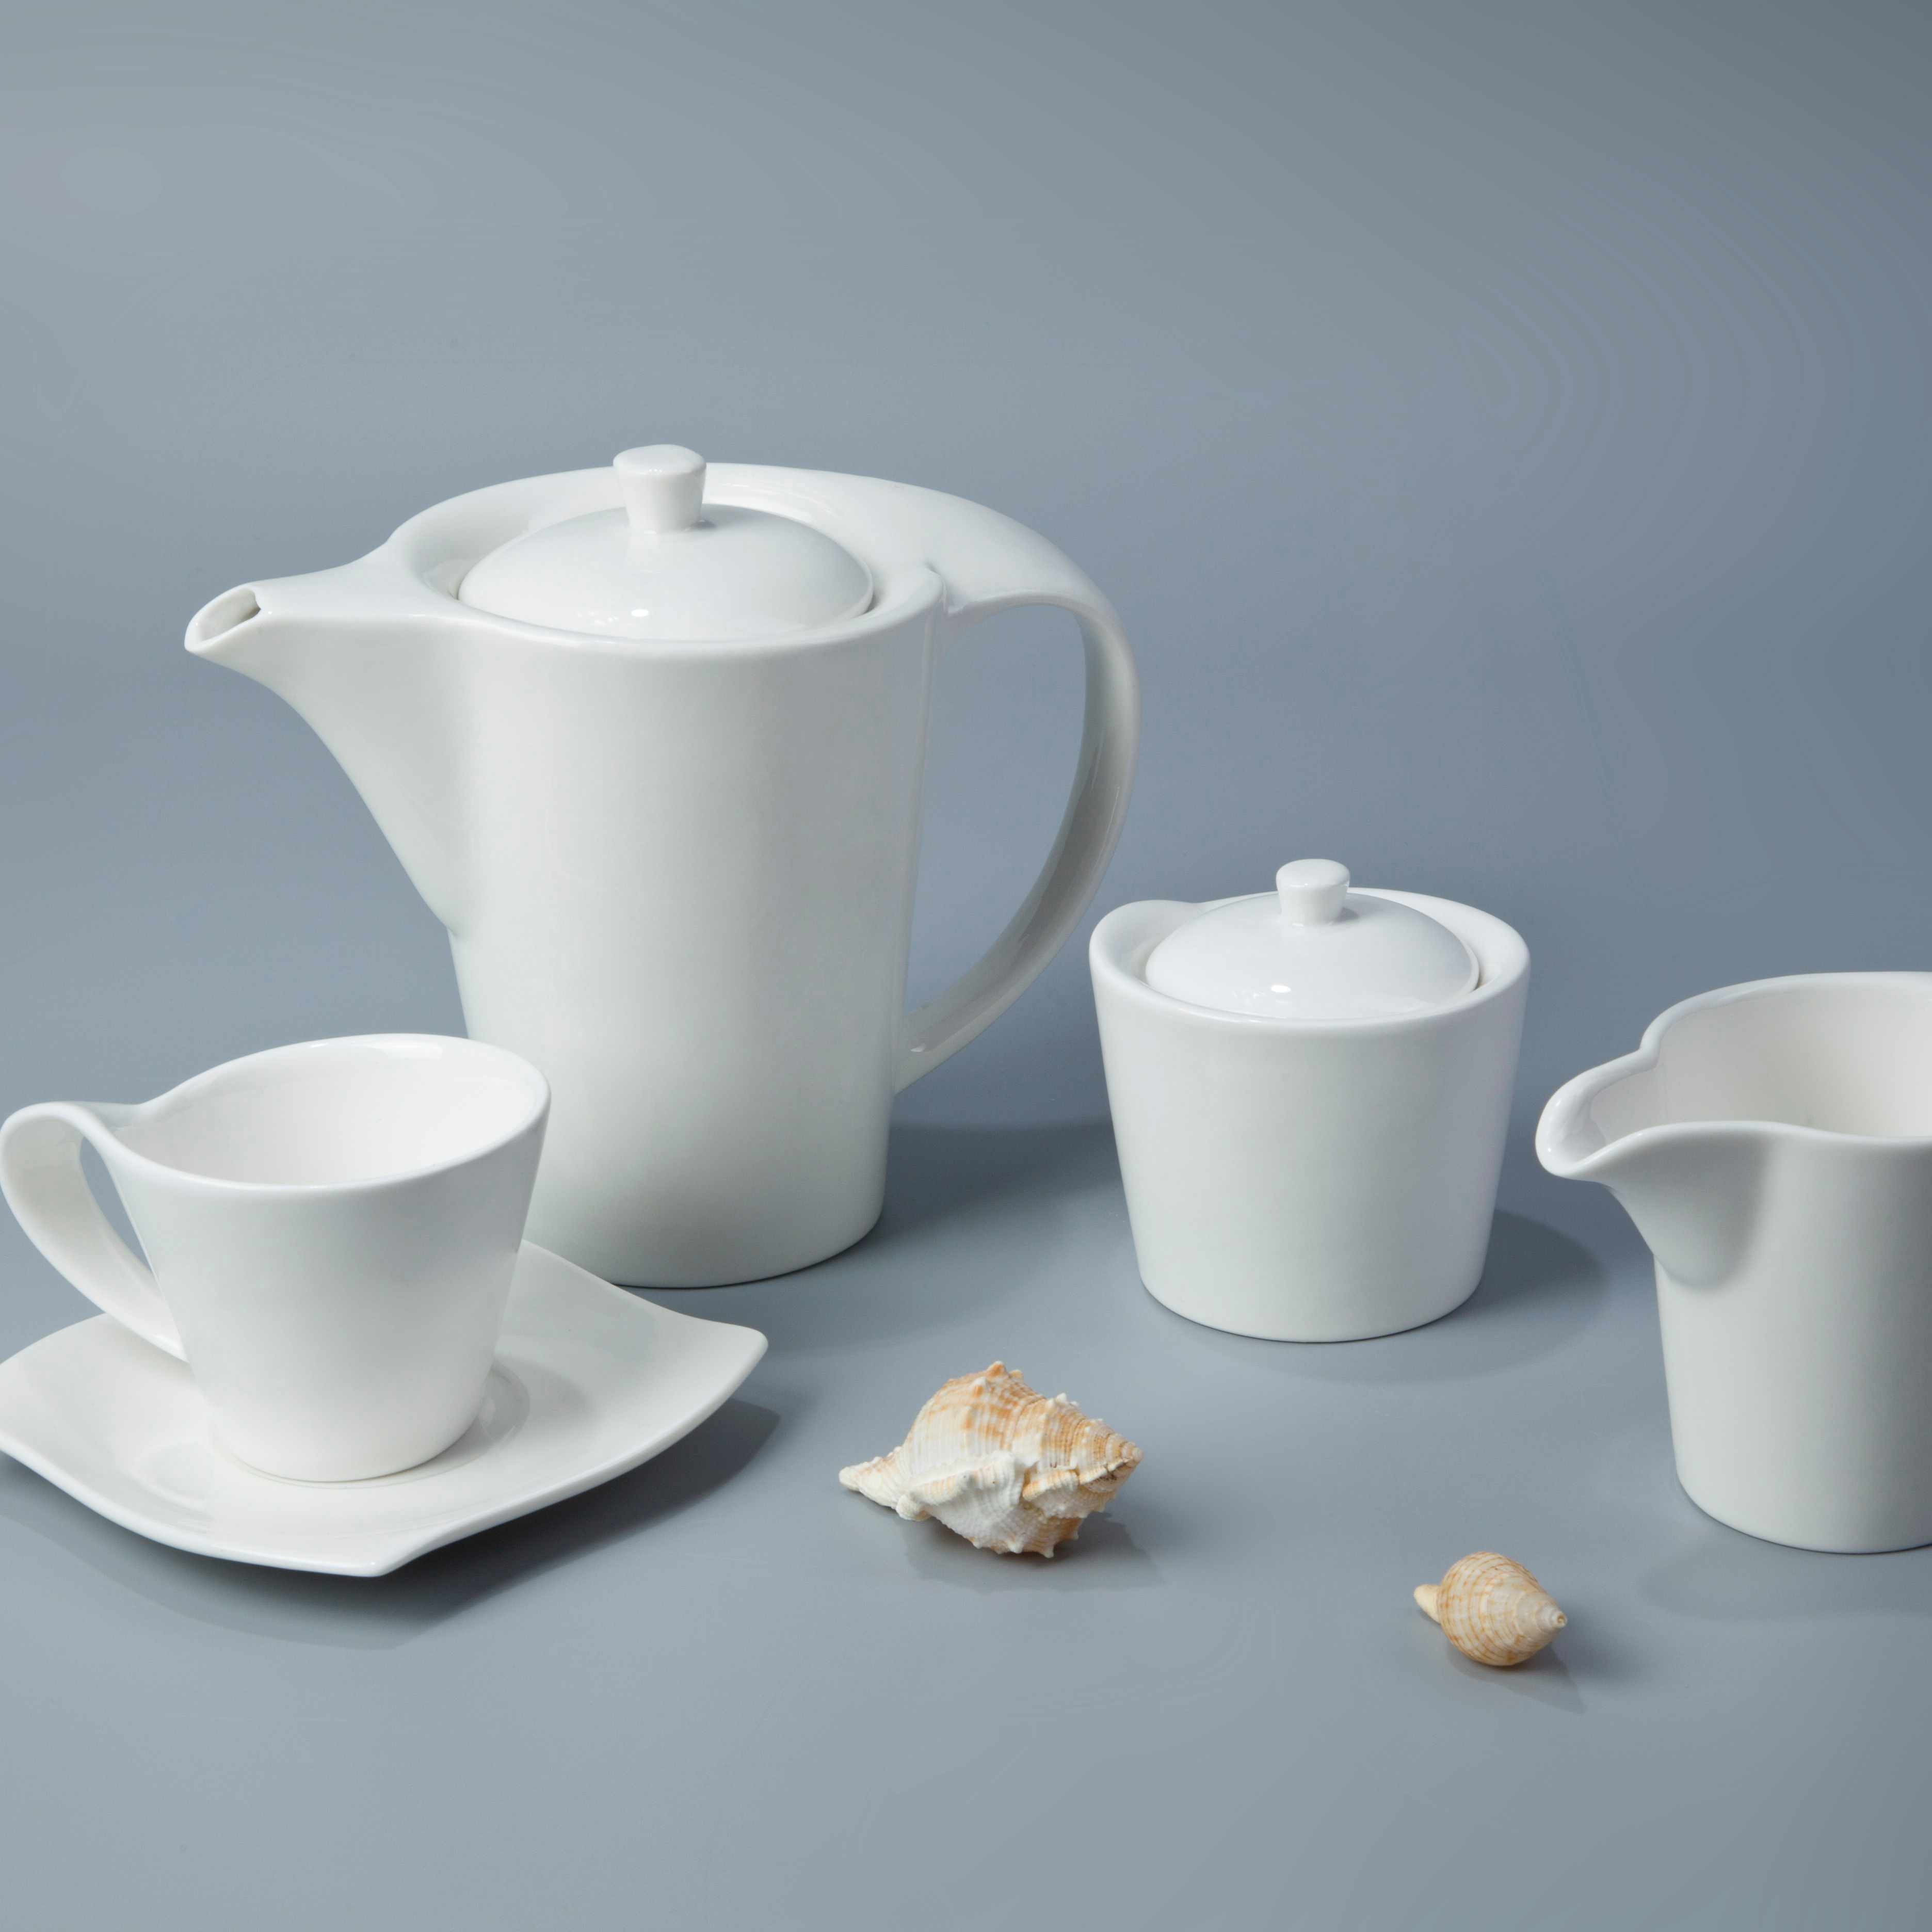 porcelain dinnerware dishwasher safe work at home mom hits the national market with prayer ...